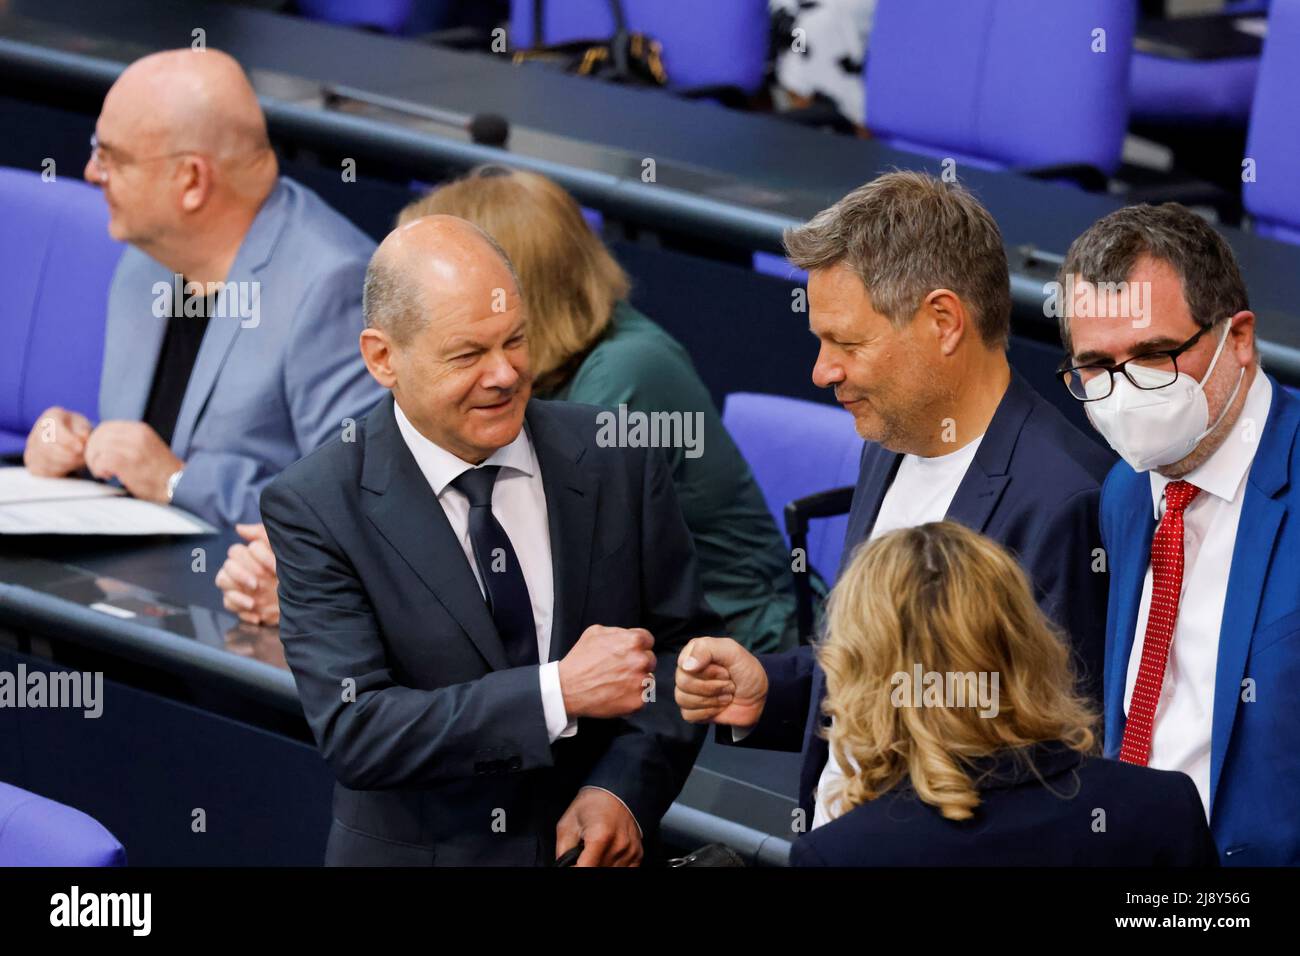 German Chancellor Olaf Scholz and German Economy and Climate Minister Robert Habeck attend a session of Germany's lower house of parliament, the Bundestag, in Berlin, Germany, May 19, 2022. REUTERS/Hannibal Hanschke Stock Photo